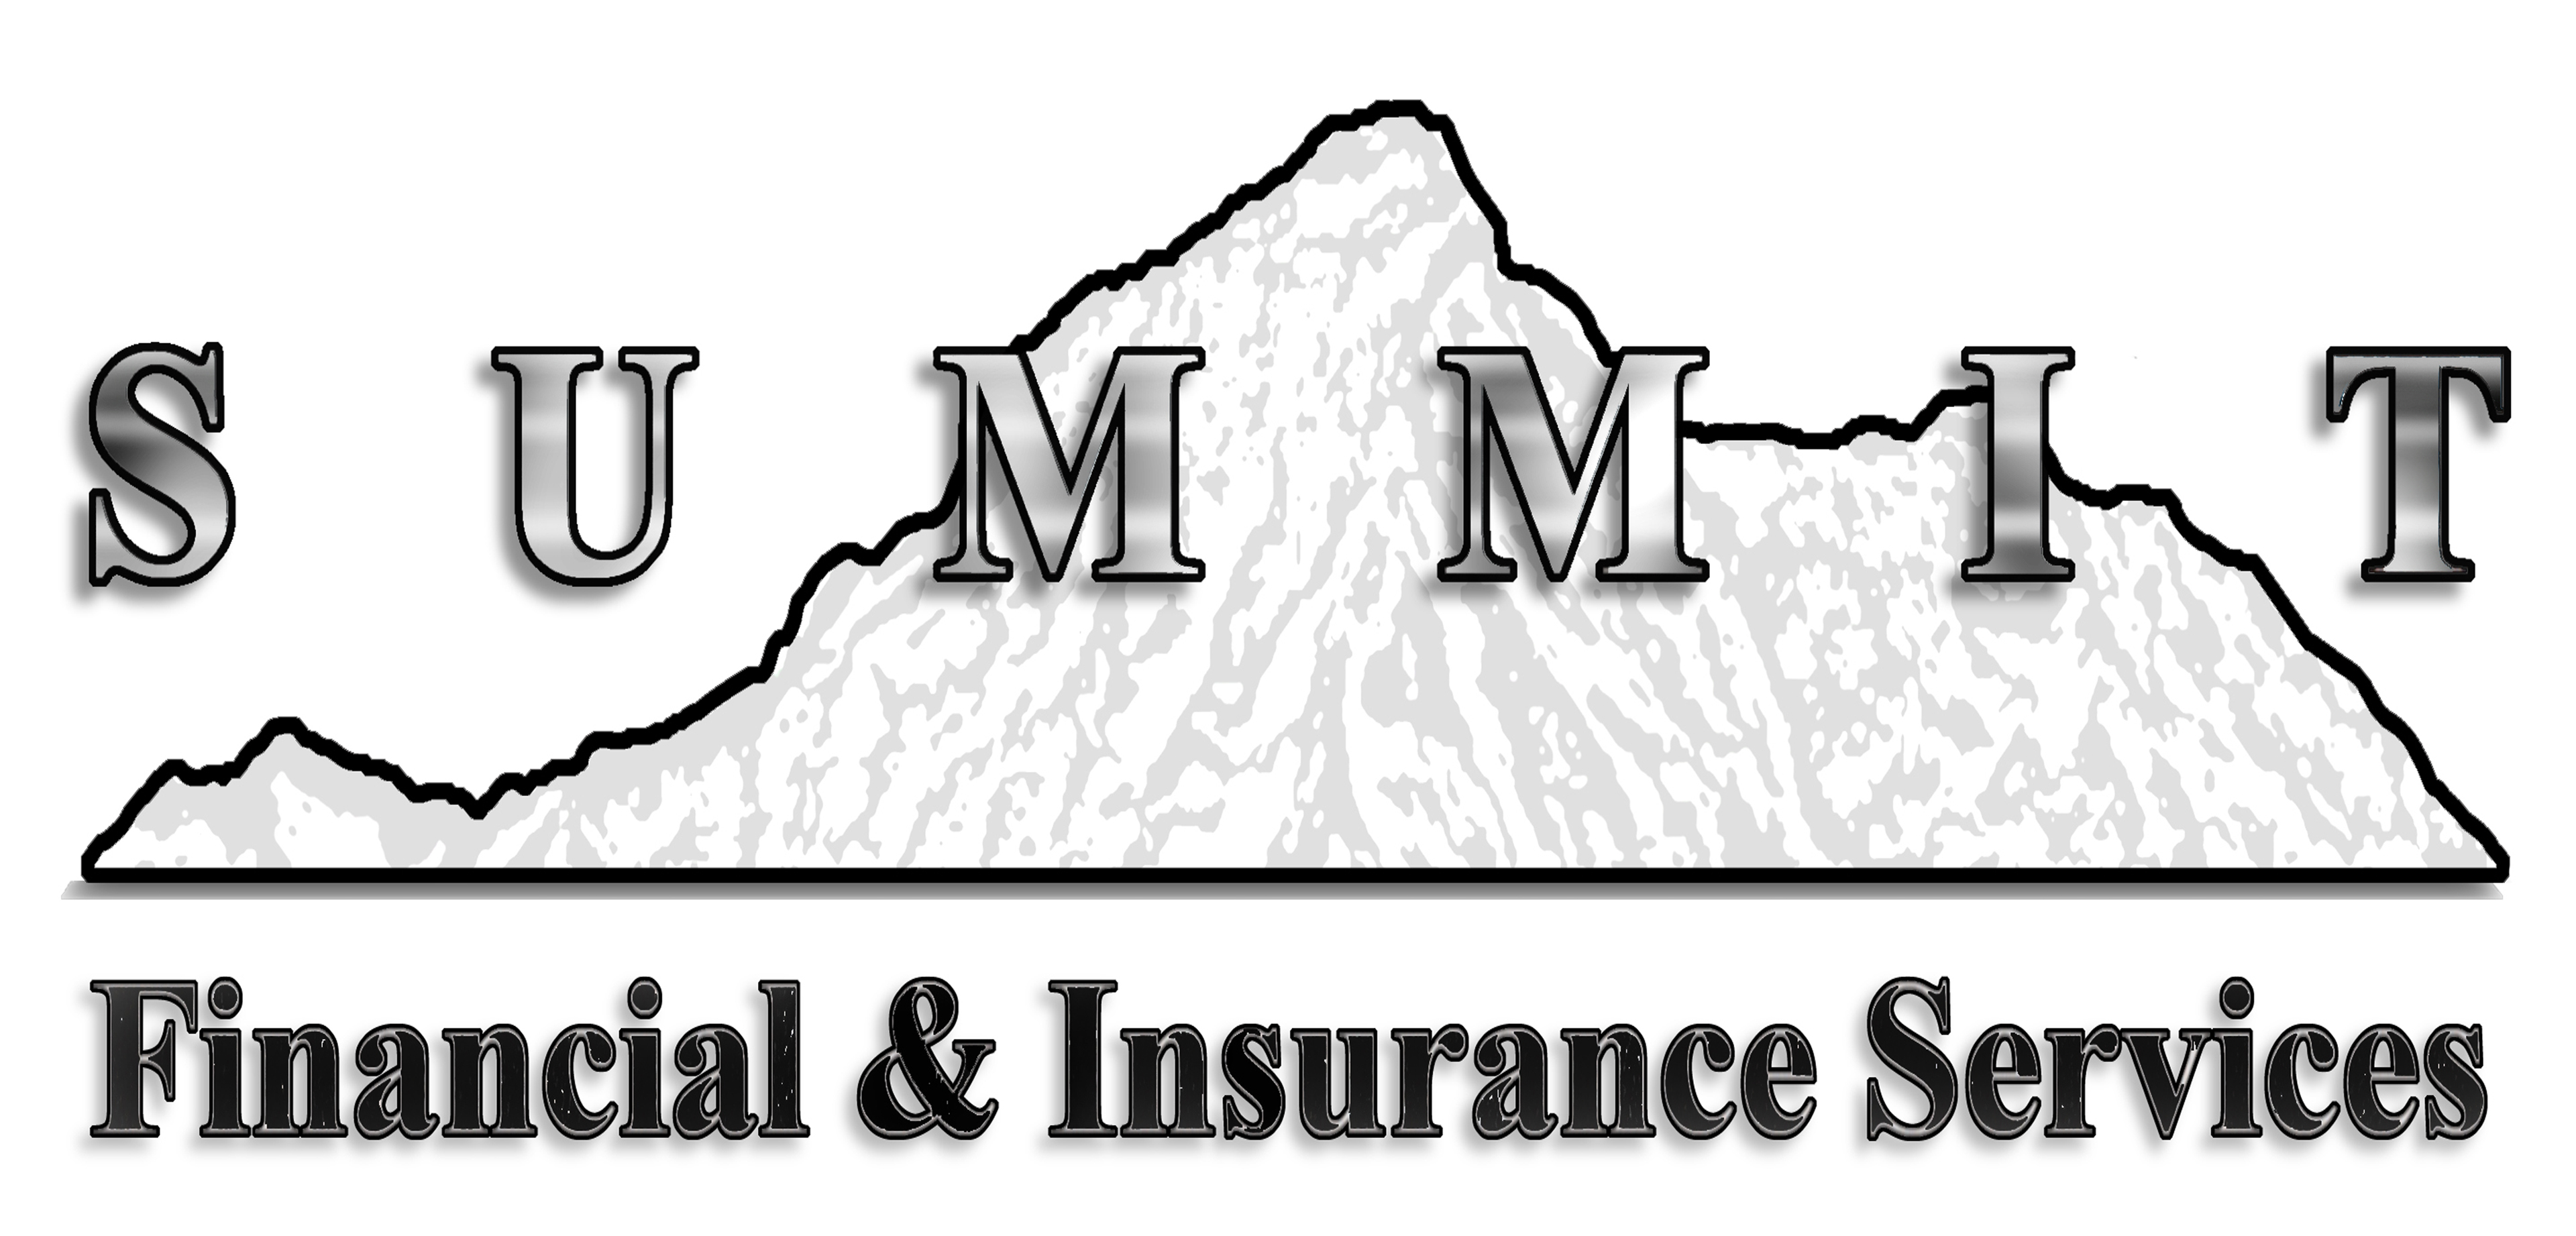 Summit Financial & Insurance Services - Silver Sponsor